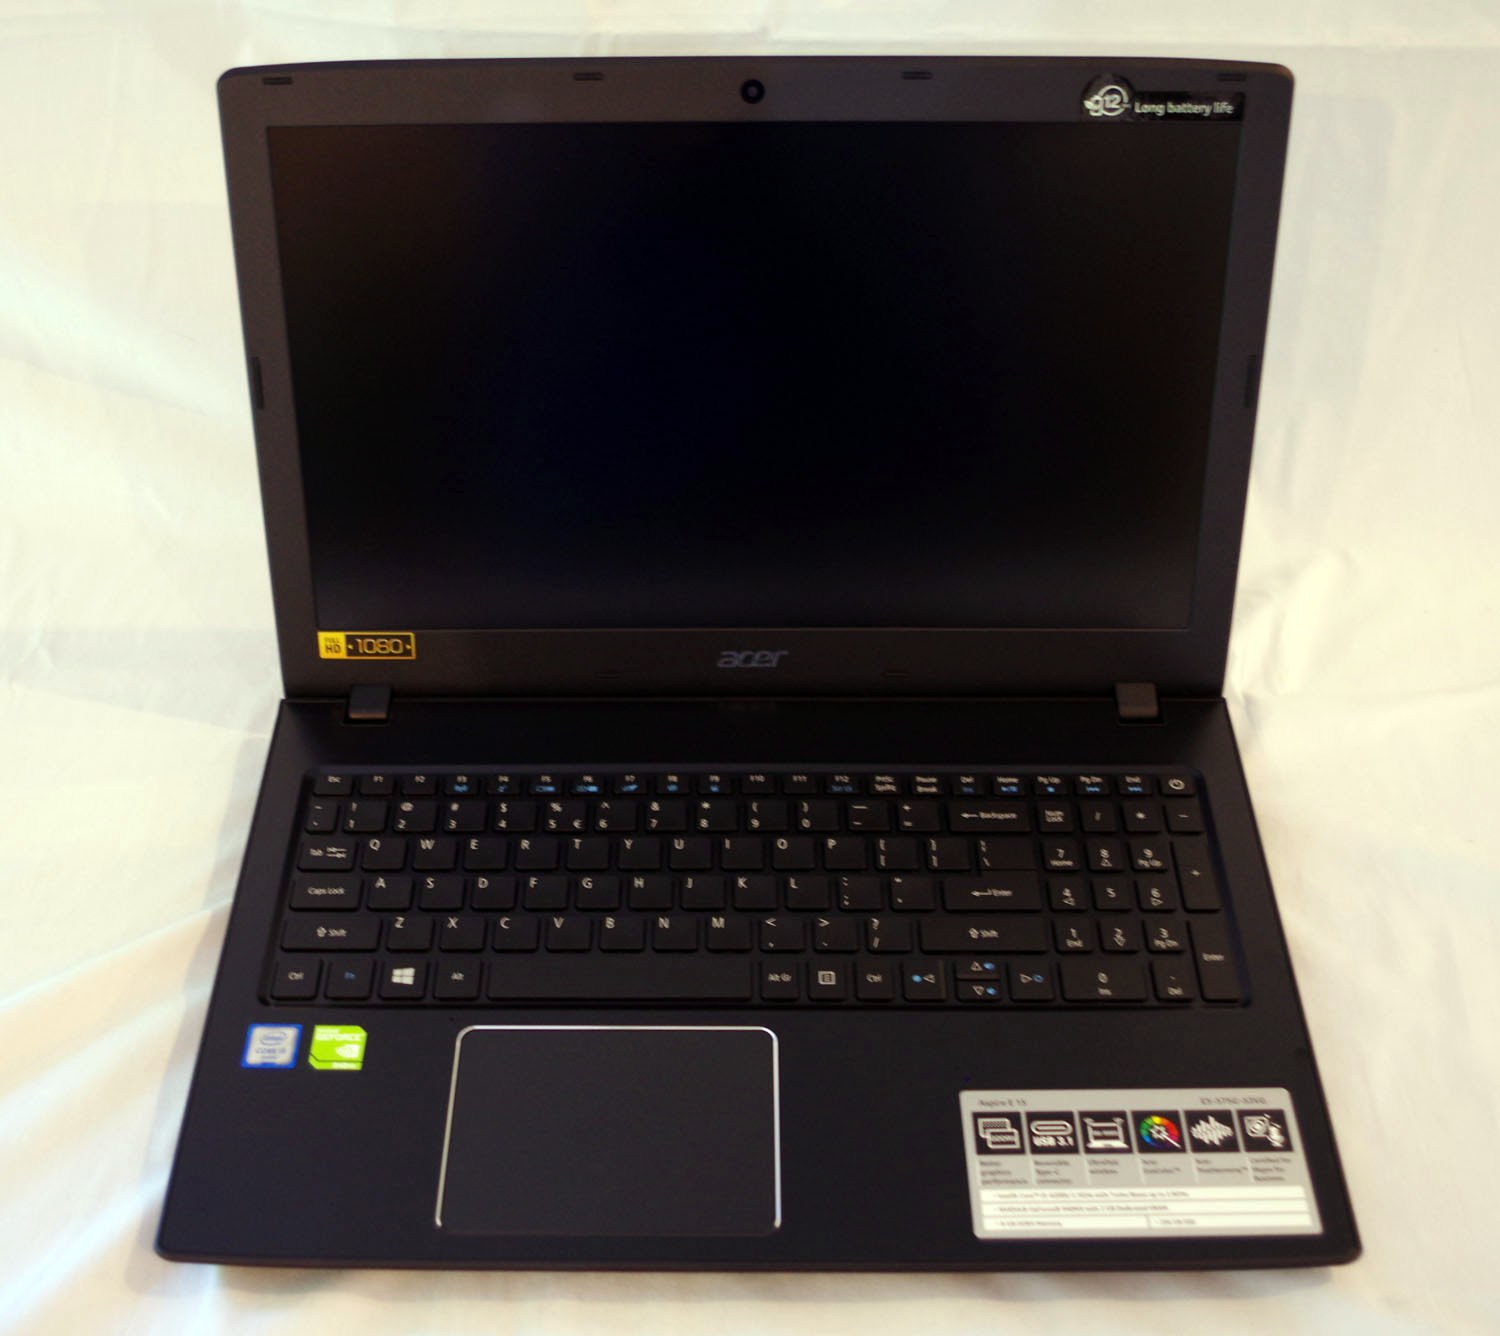 On My New Acer Aspire E15 - [Blogging Intensifies]